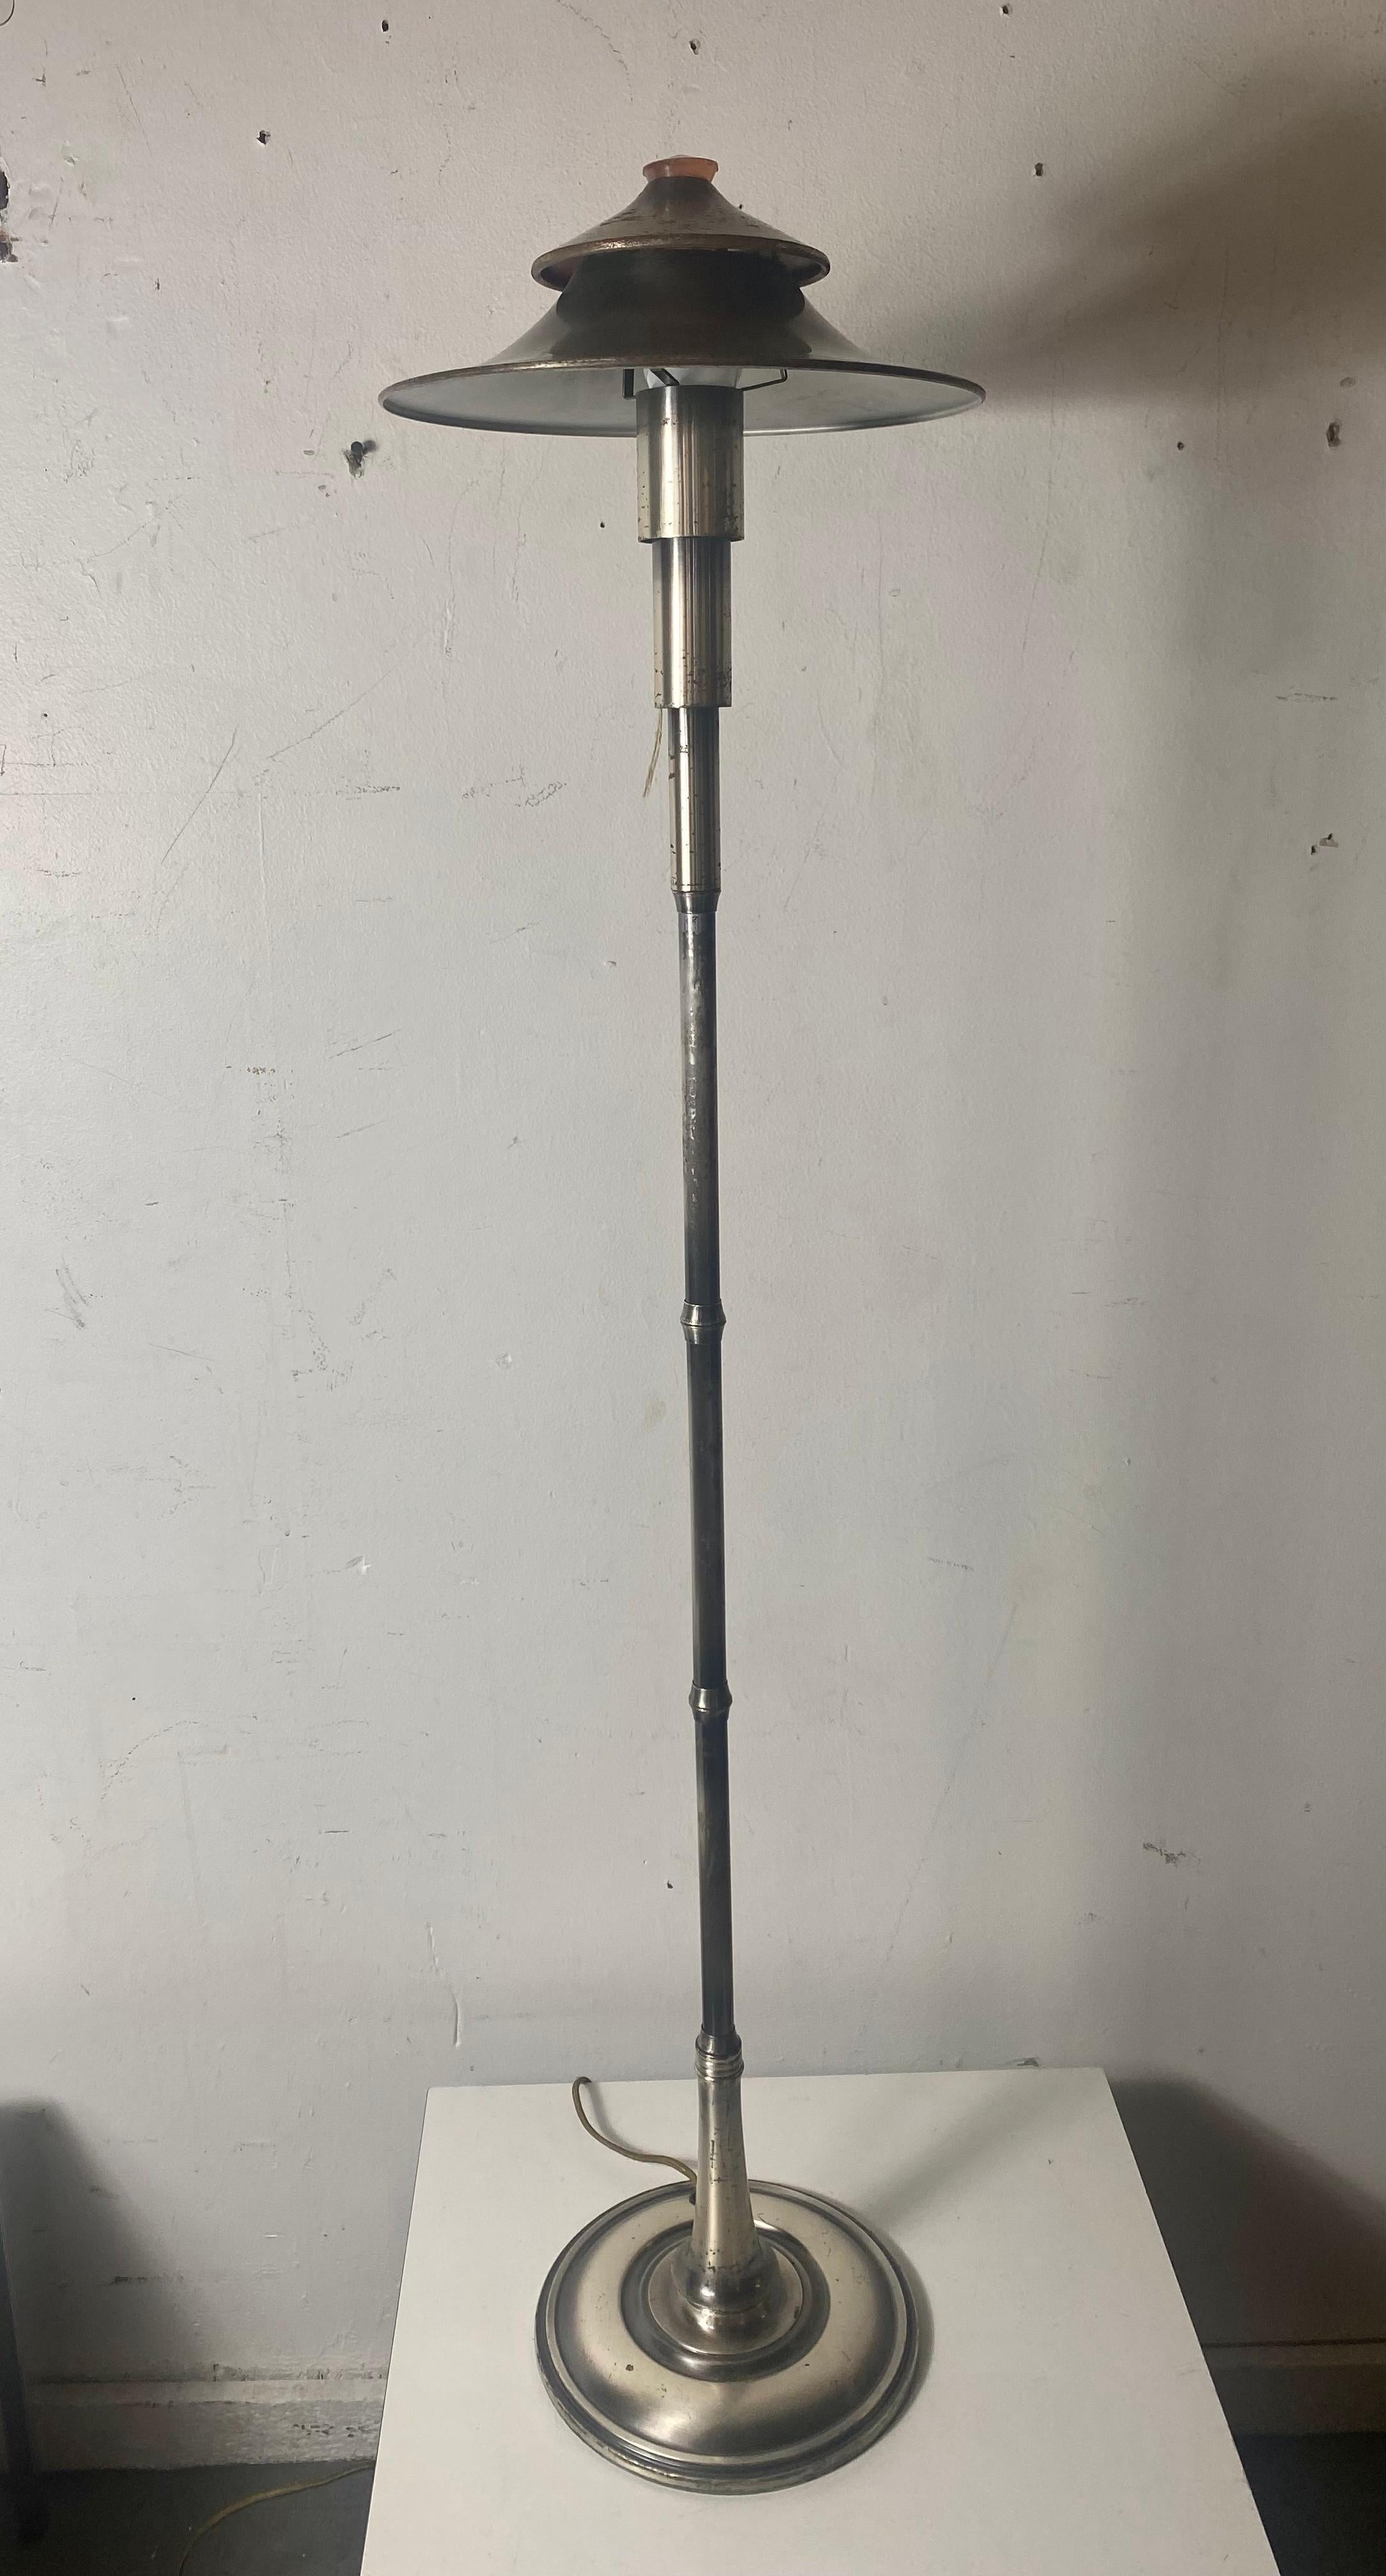 Art Deco Modernist table or floor lamp by Leroy C. Doane for Miller. Extremely rare version. Three standards witch allow lamp to convert from table lamp to floor lamp. Ingenious design, electric conducted by connecting standards, measuring 26